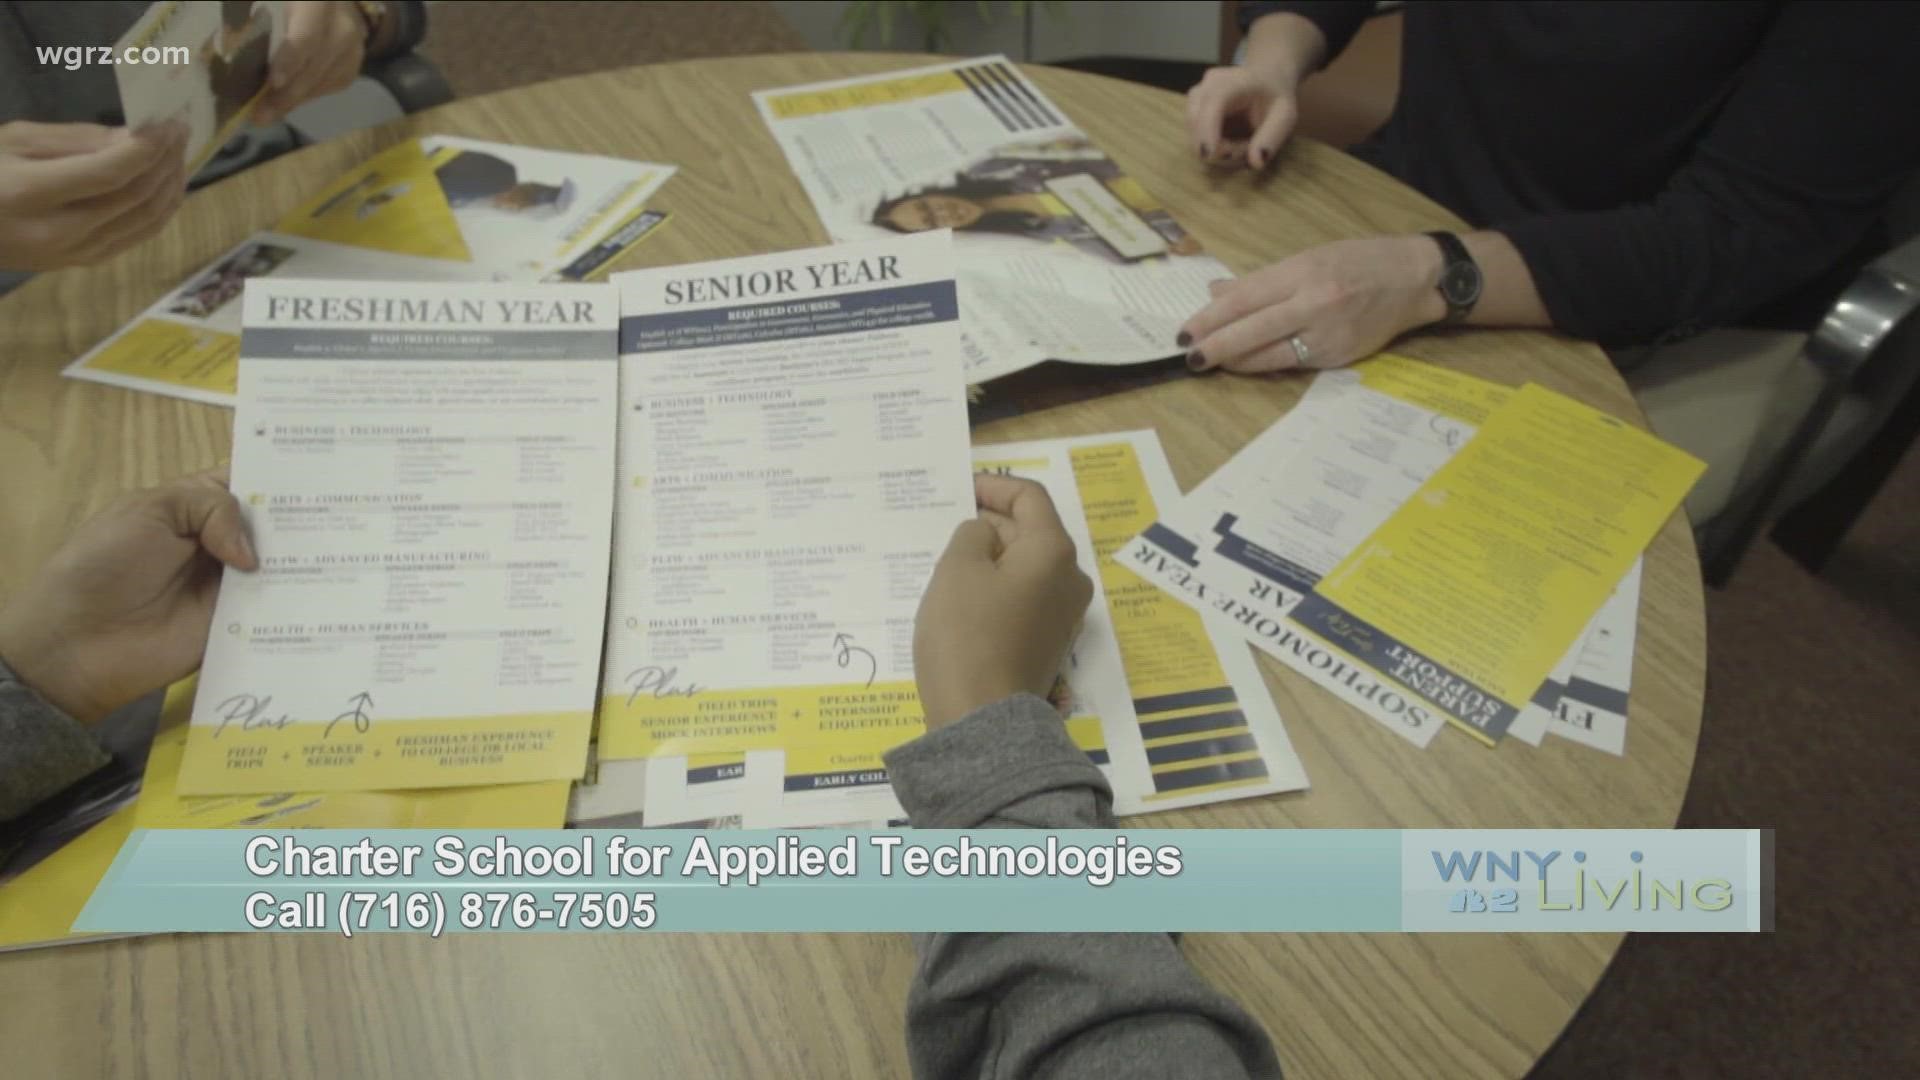 WNY Living - January 8 - Charter School for Applied Technologies (THIS VIDEO IS SPONSORED BY CHARTER SCHOOL FOR APPLIED TECHNOLOGIES)